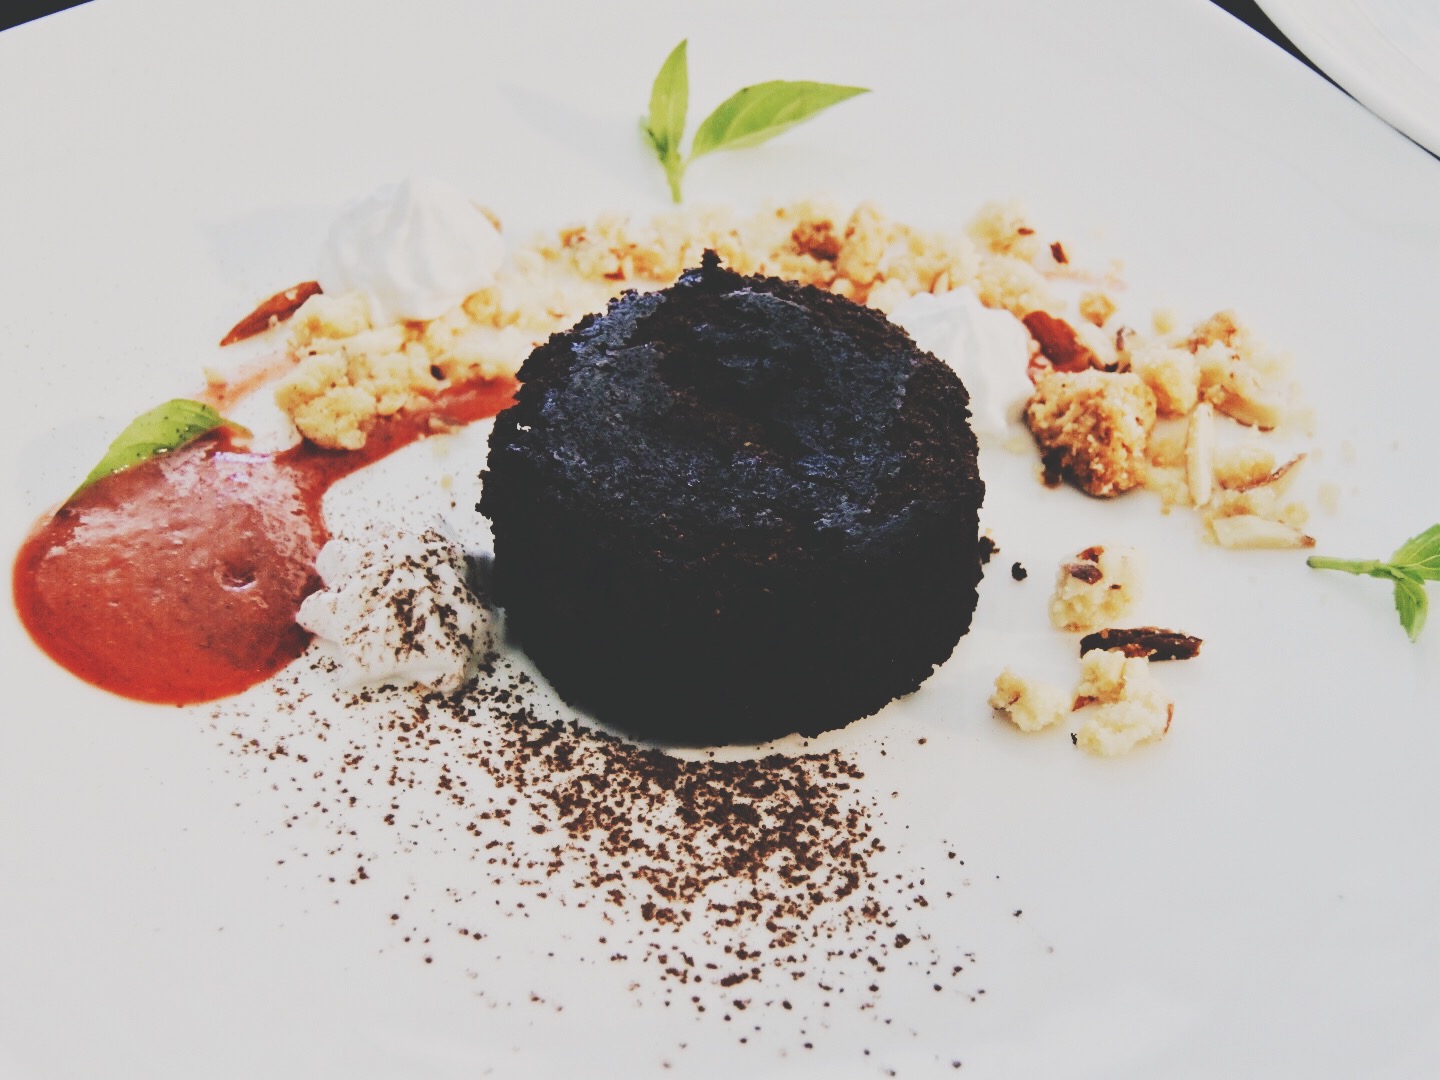 The choco lava cake with almond crumble and strawberry basil coulis